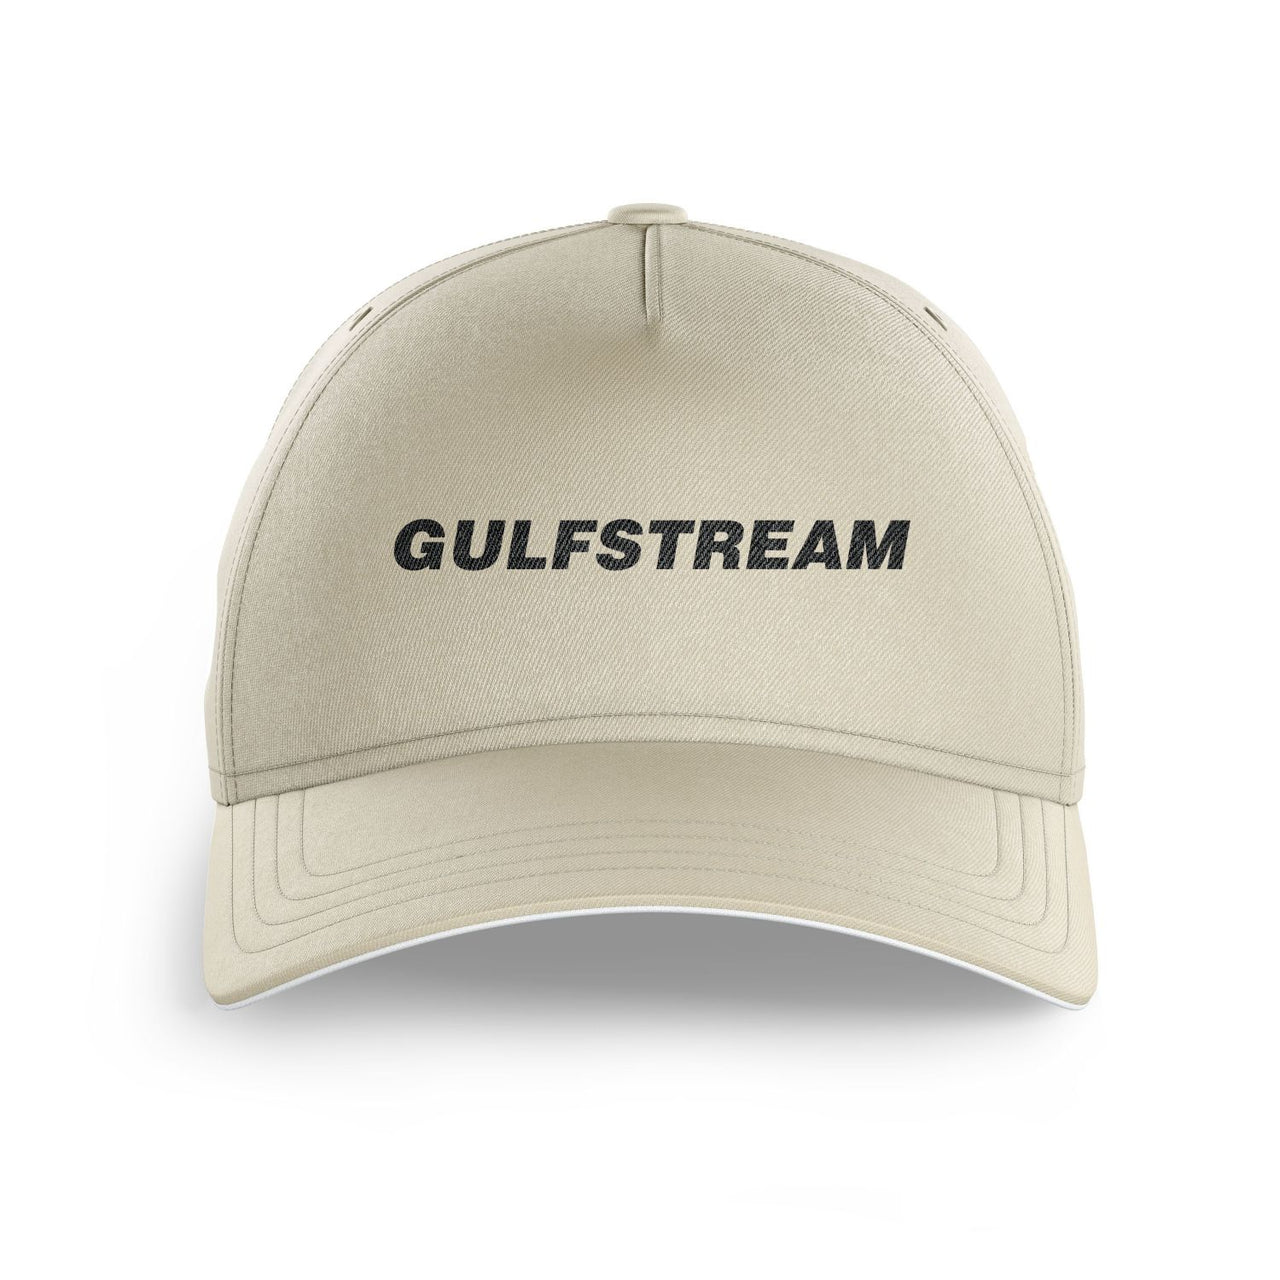 Gulfstream & Text Printed Hats